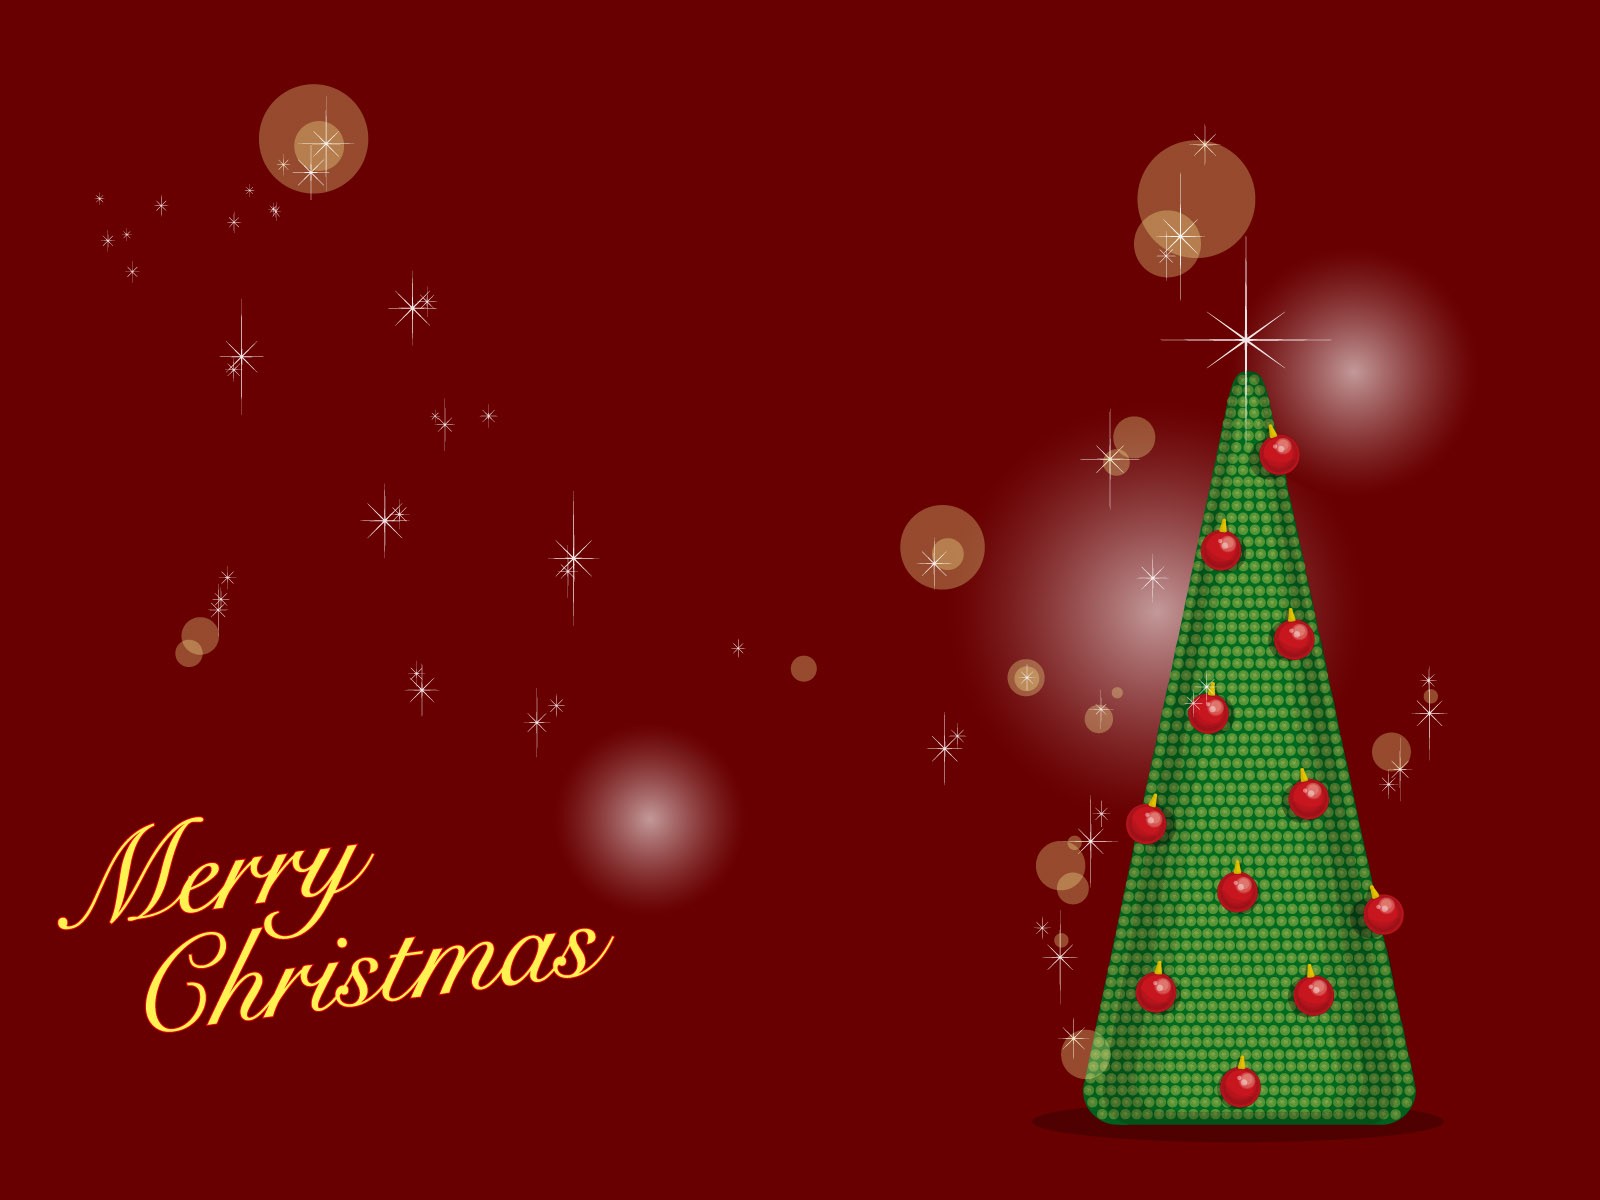 Exquisite Christmas Theme HD Wallpapers #21 - 1600x1200